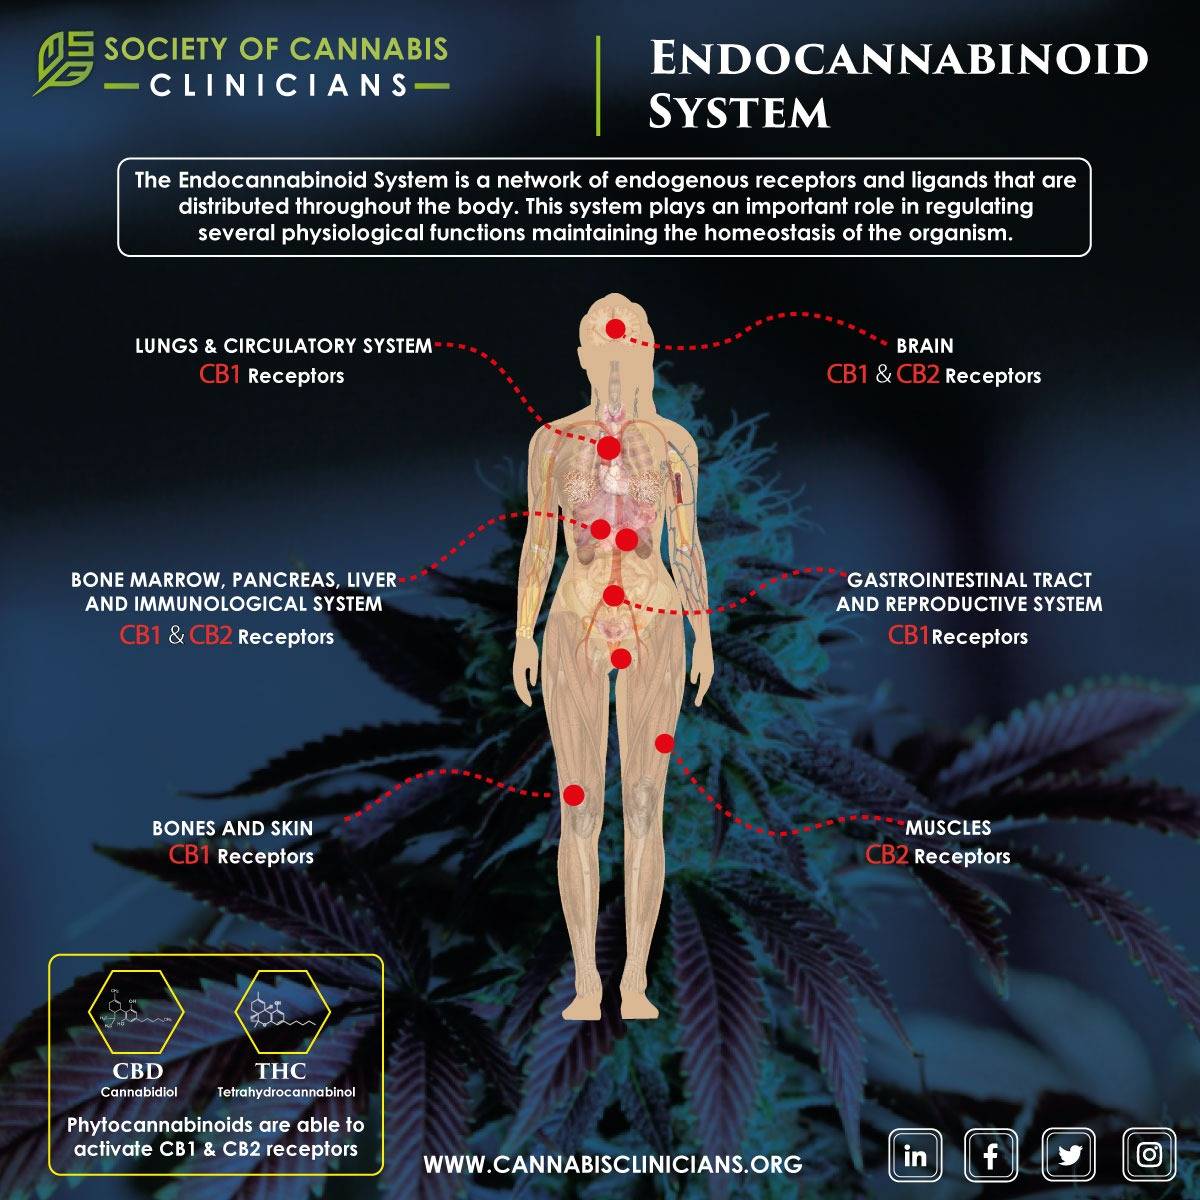 🌱🏃‍♀️The ECS exists and is active in your body even if you don't use cannabis. It's responsible for regulating and balancing the immune response, communication between cells, appetite and metabolism, memory, and more. #cannabisclinicians #medicalcannabis #cannabiscommunity